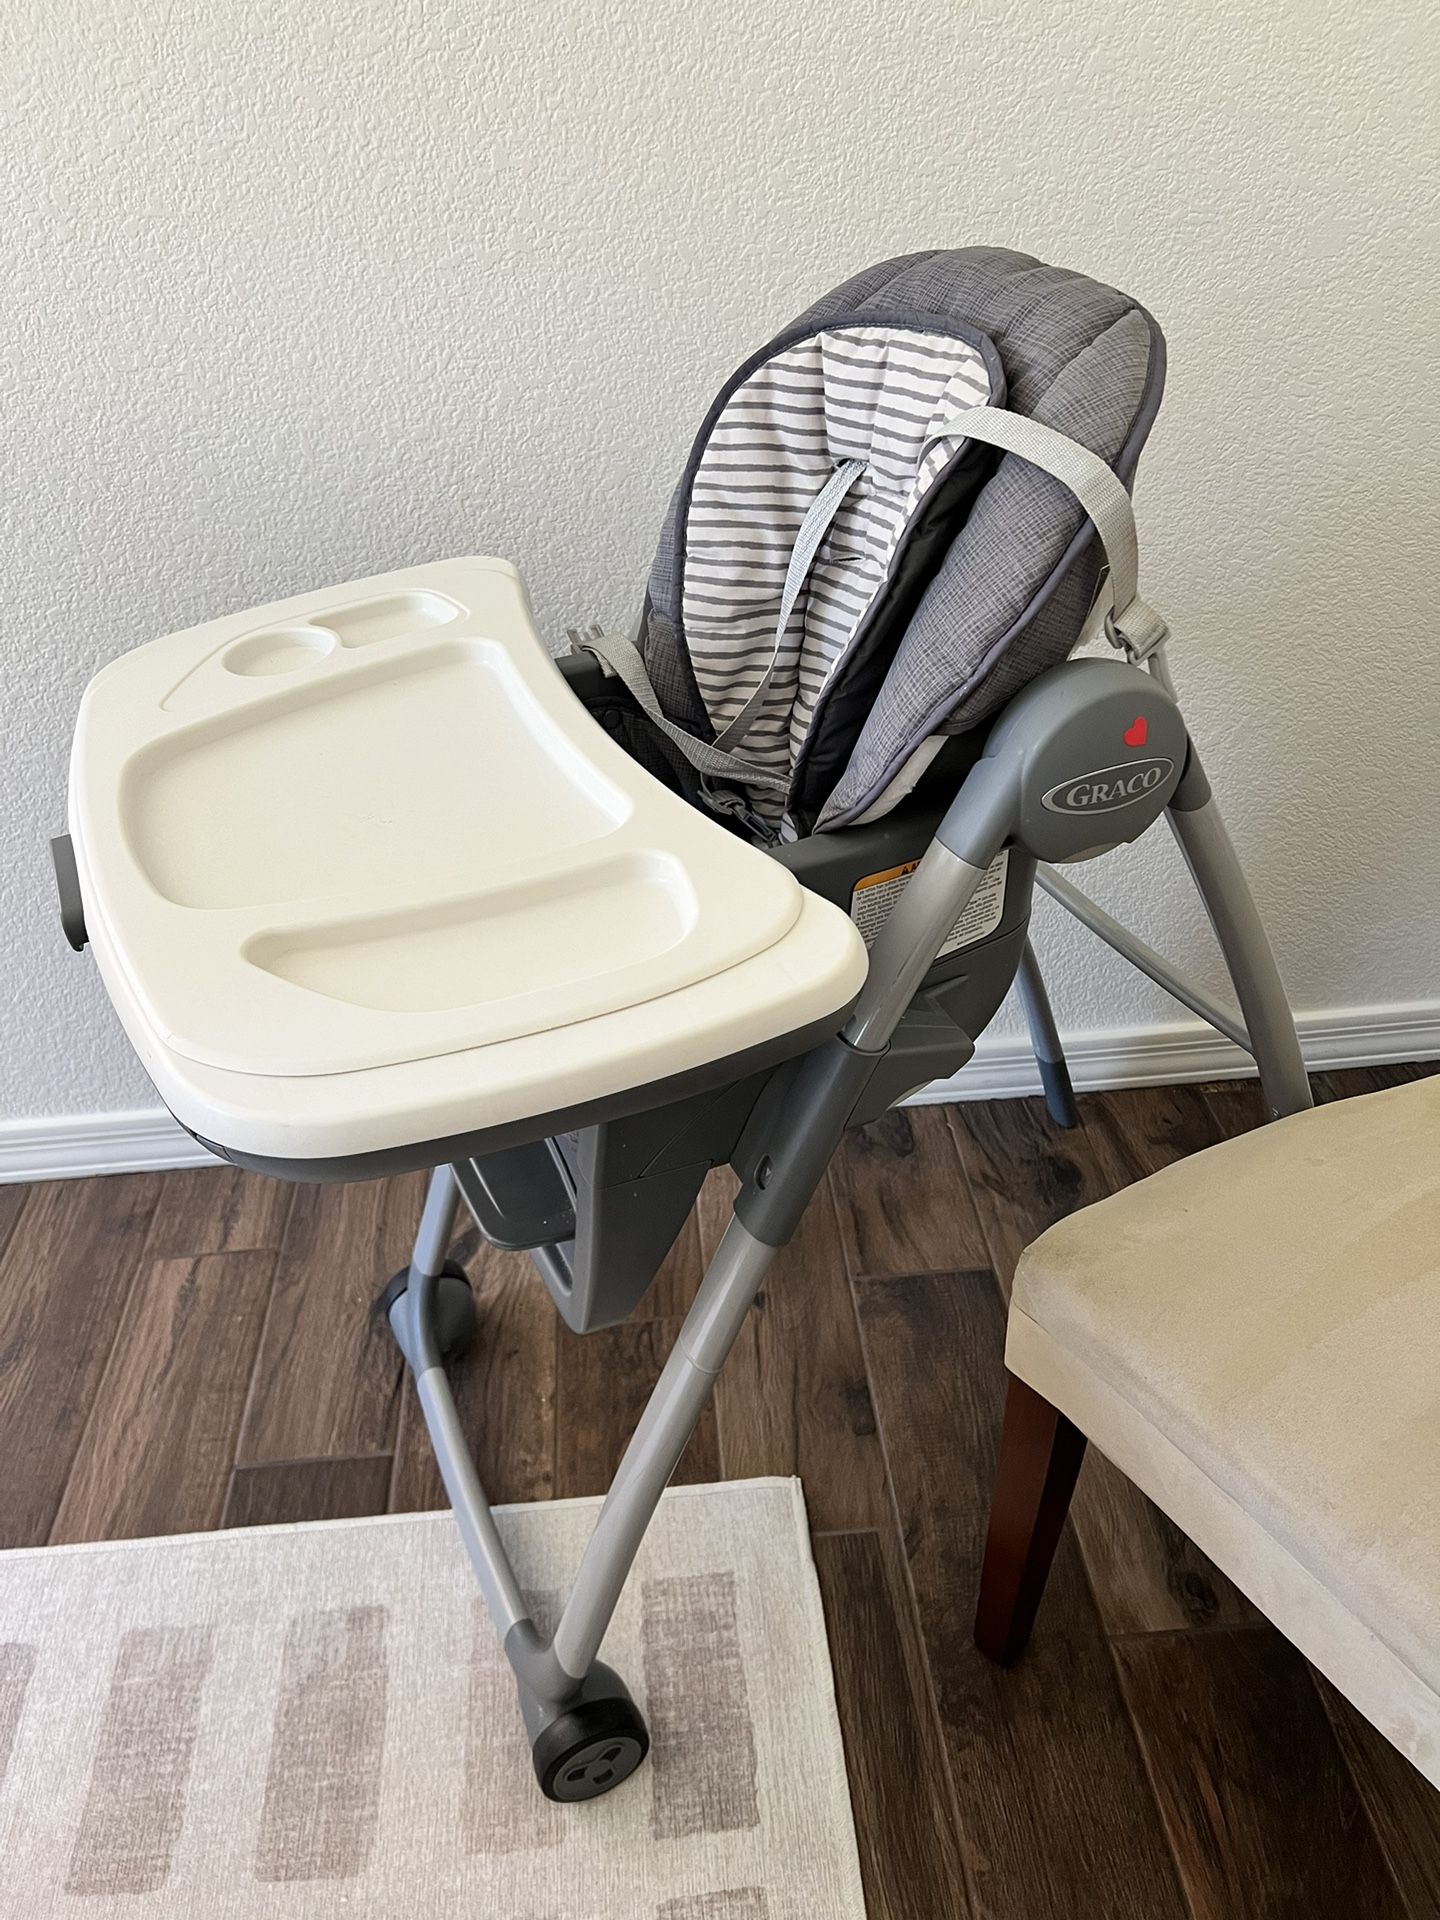 Graco Table2Table Premier Fold 7 in 1 Convertible High Chair | Converts to Dining Booster Seat, Kids Table, and More, 